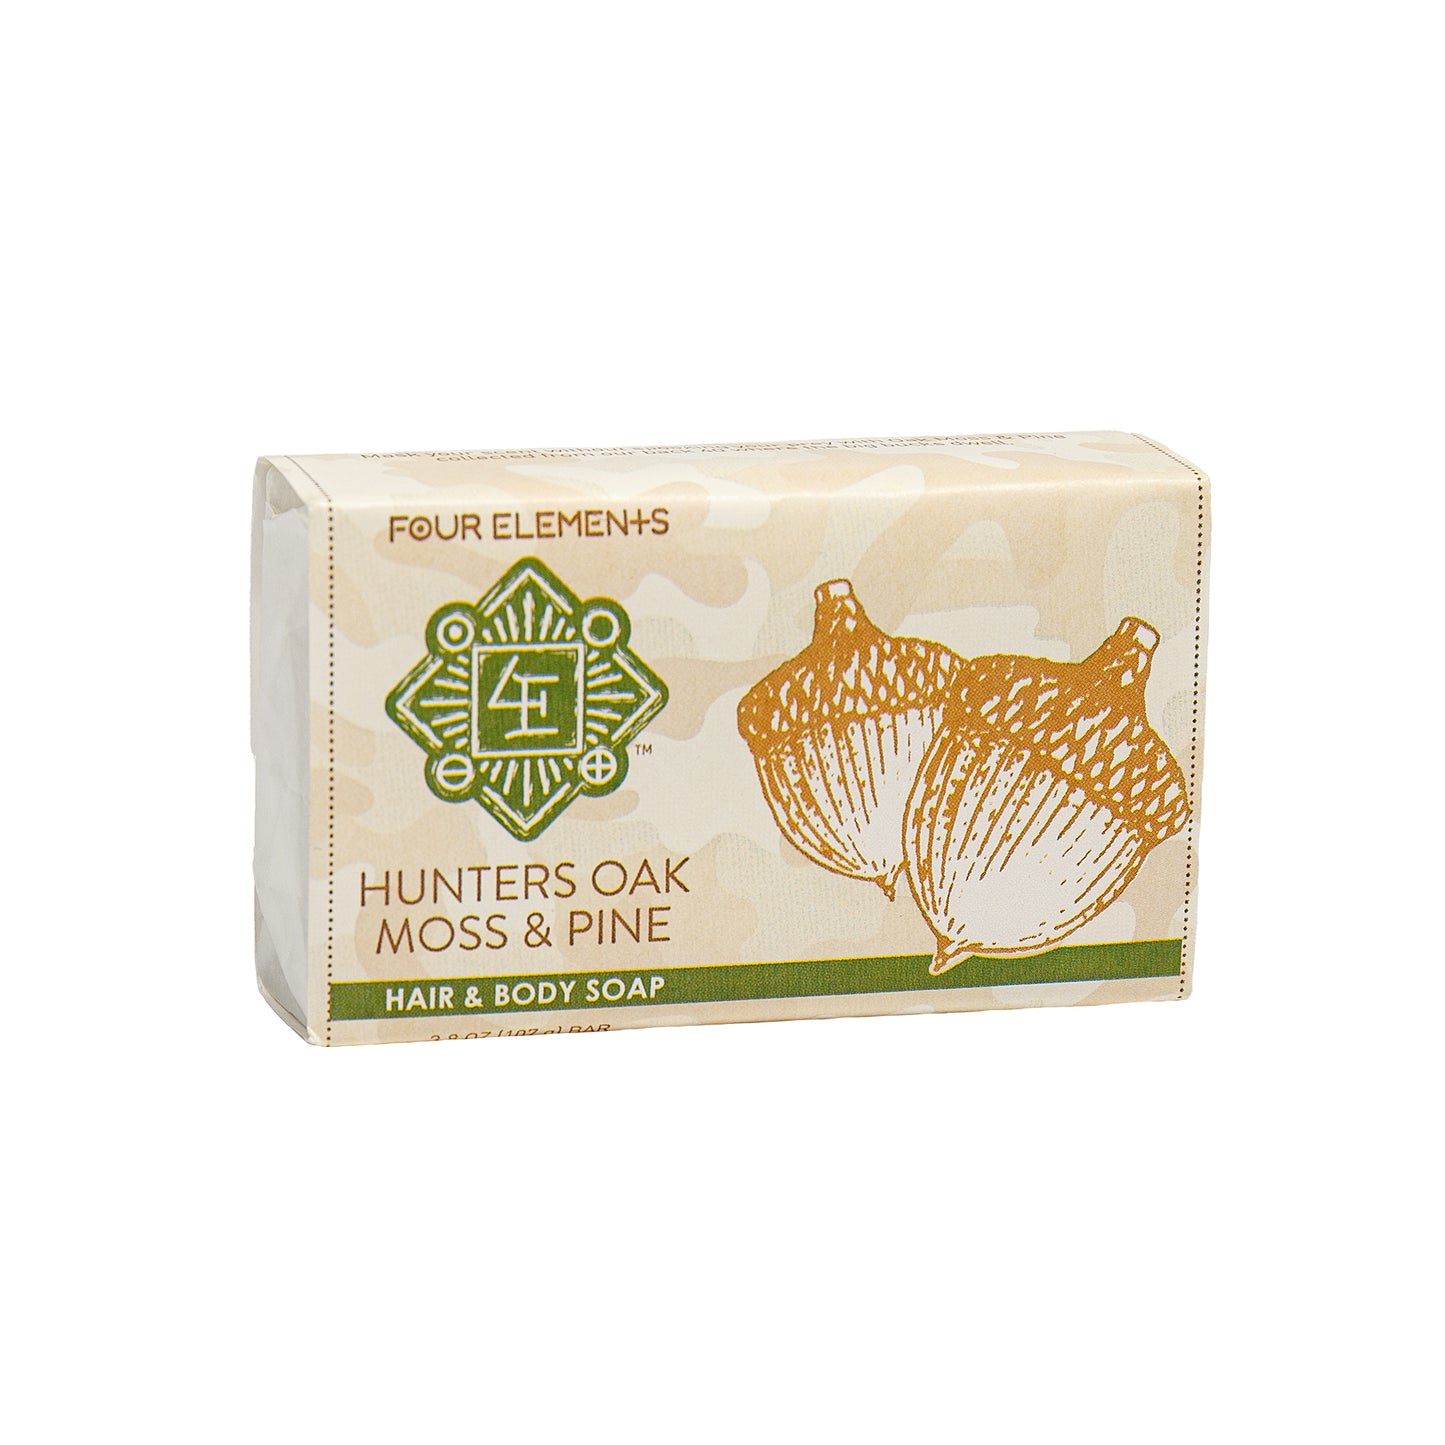 Primary Image of Hunters Oak Moss & Pine Hair & Body Soap